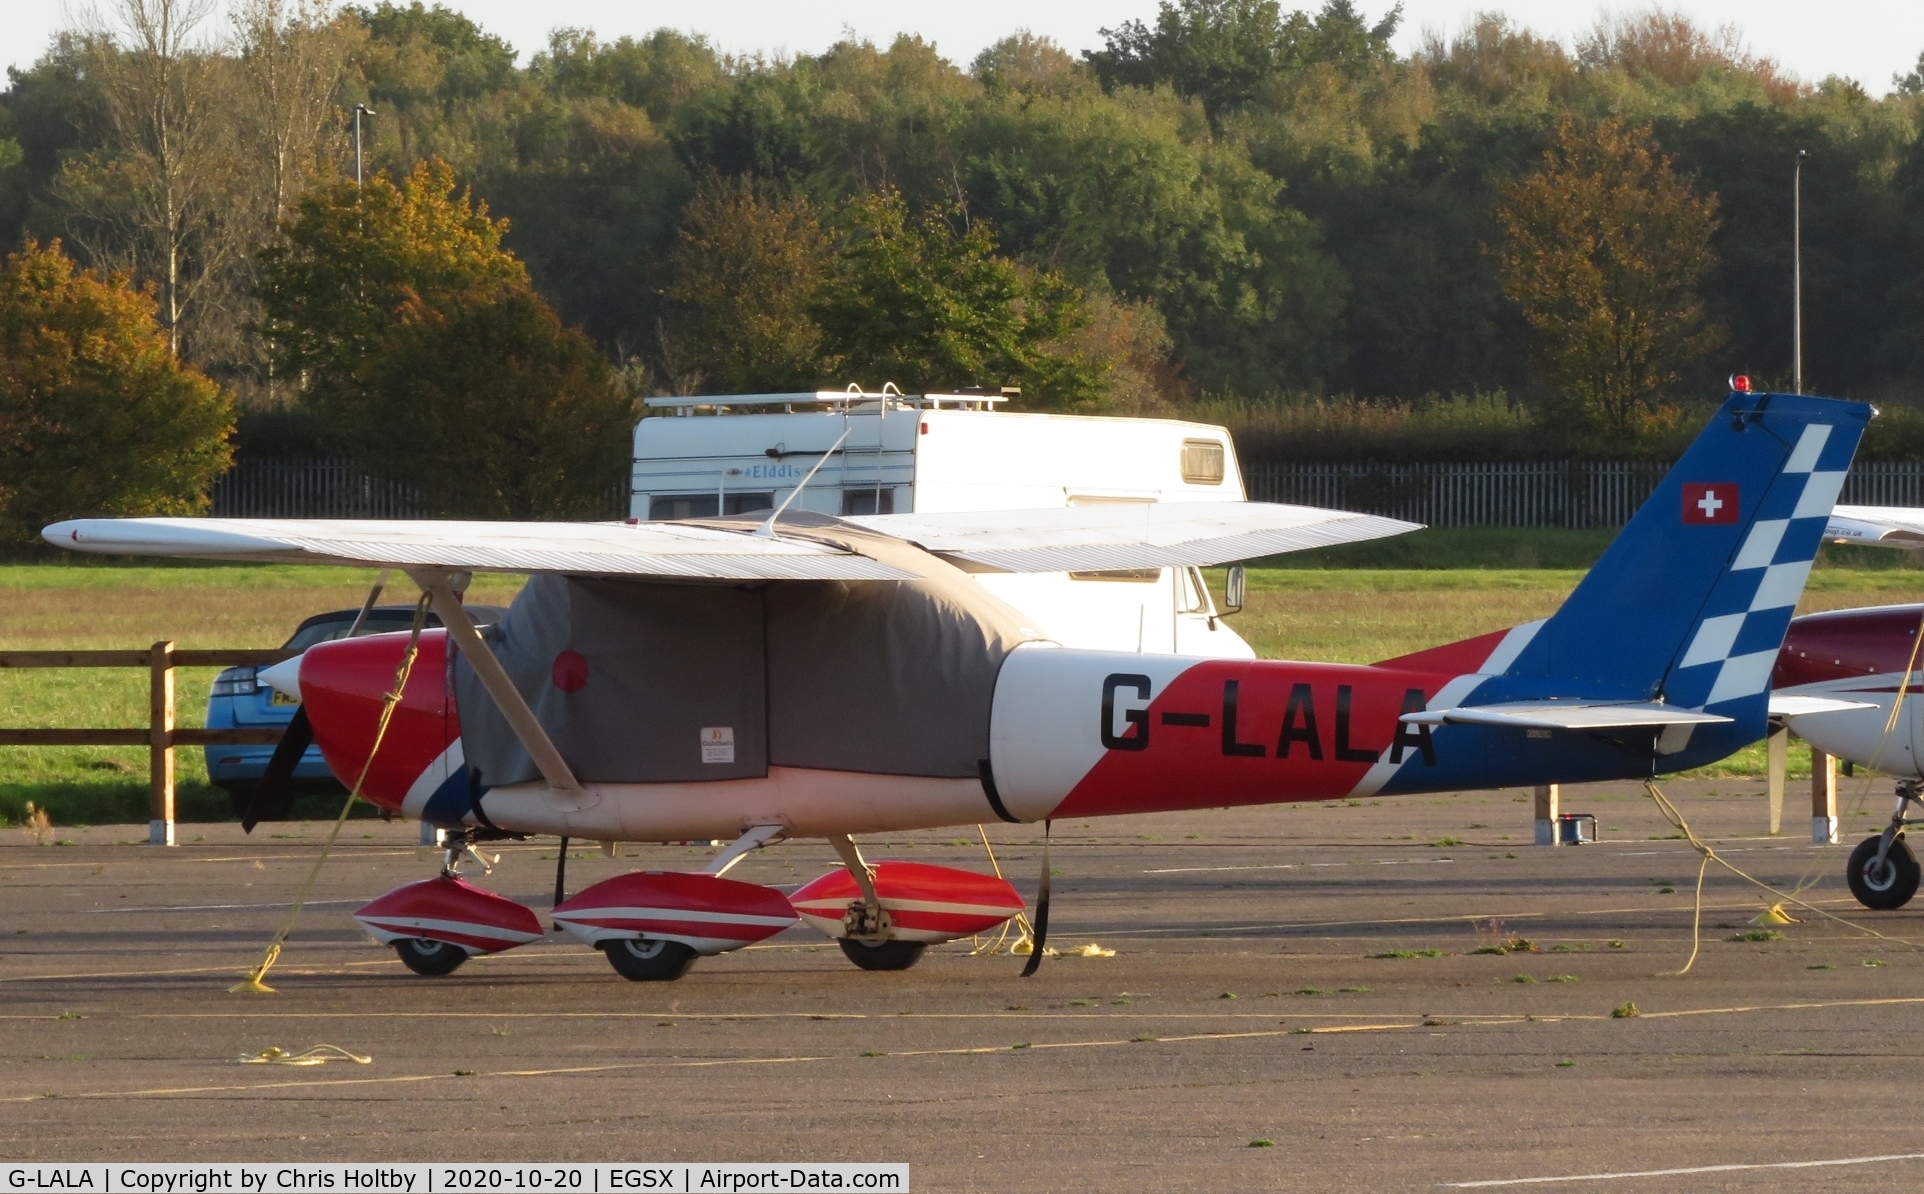 G-LALA, 1969 Reims FA150K Aerobat C/N FA1500005, Parked and now based at North Weald, Essex with its ex-Swiss insignia still showing on the tail.